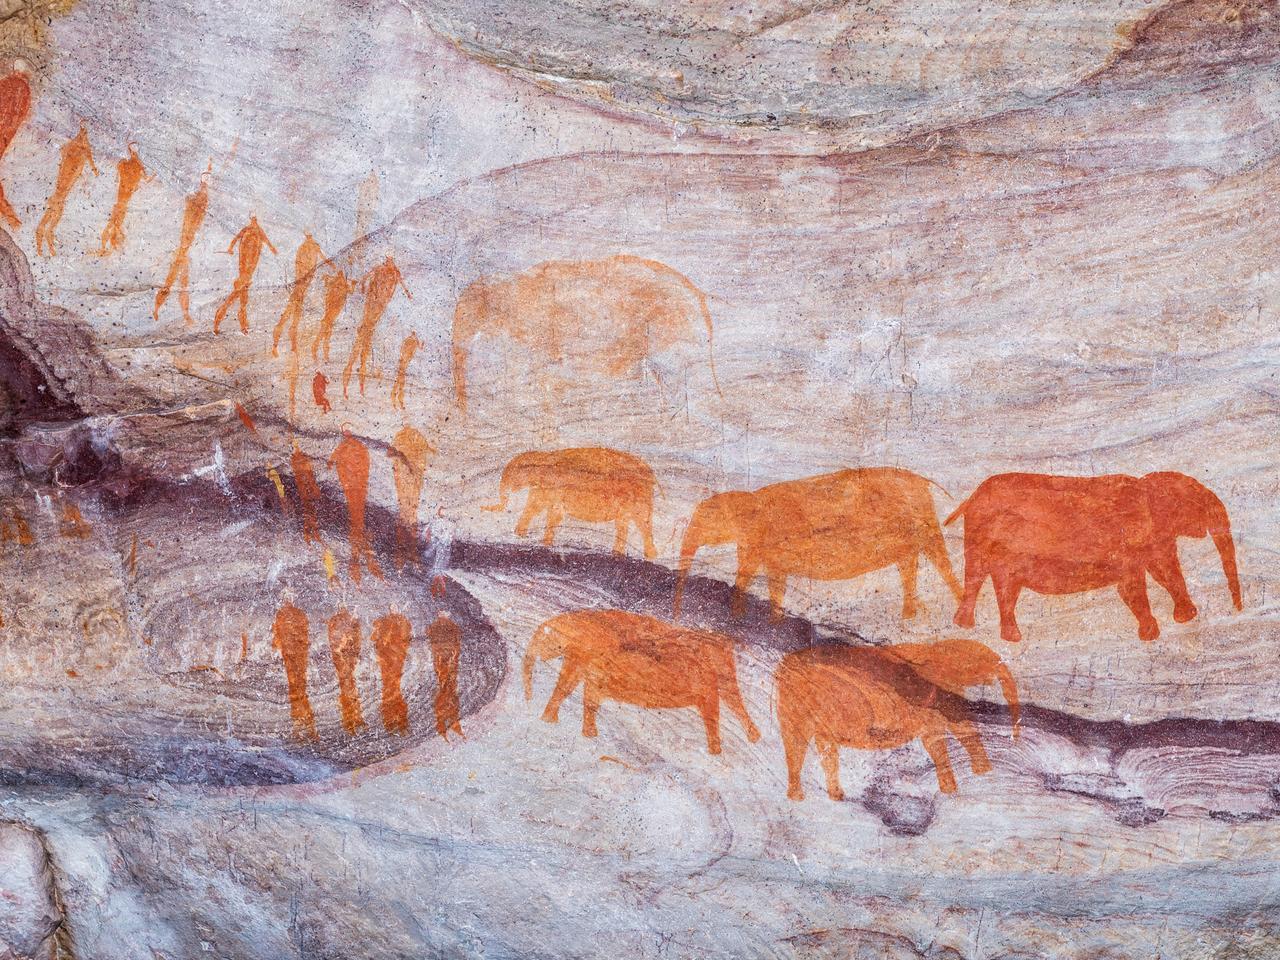 San rock art at the Stadsaal Caves in Cederberg Mountains